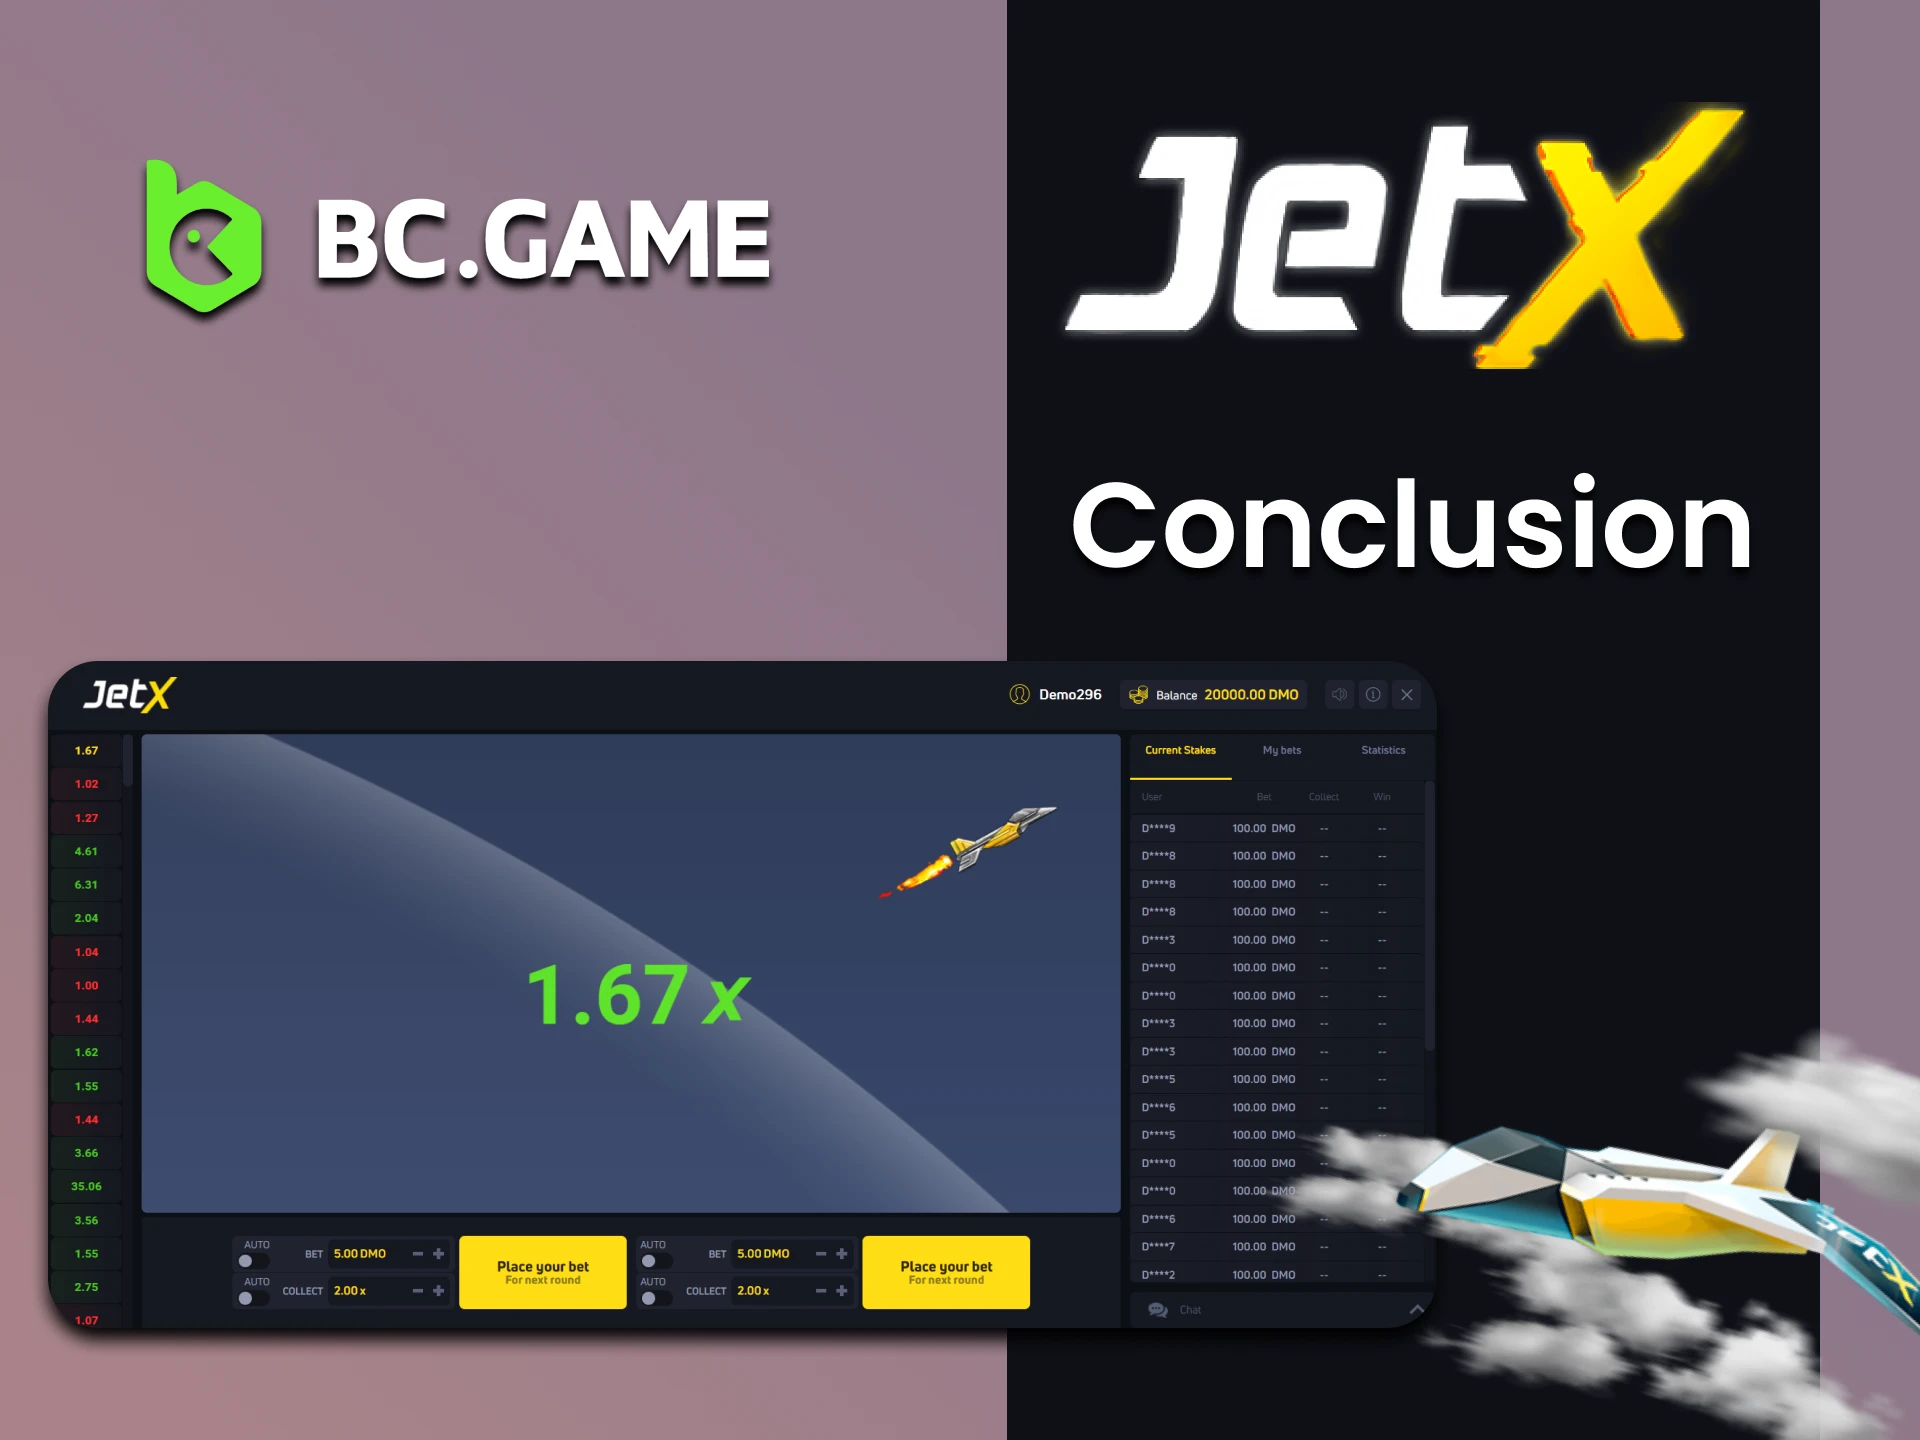 BC Game is ideal for playing JetX.